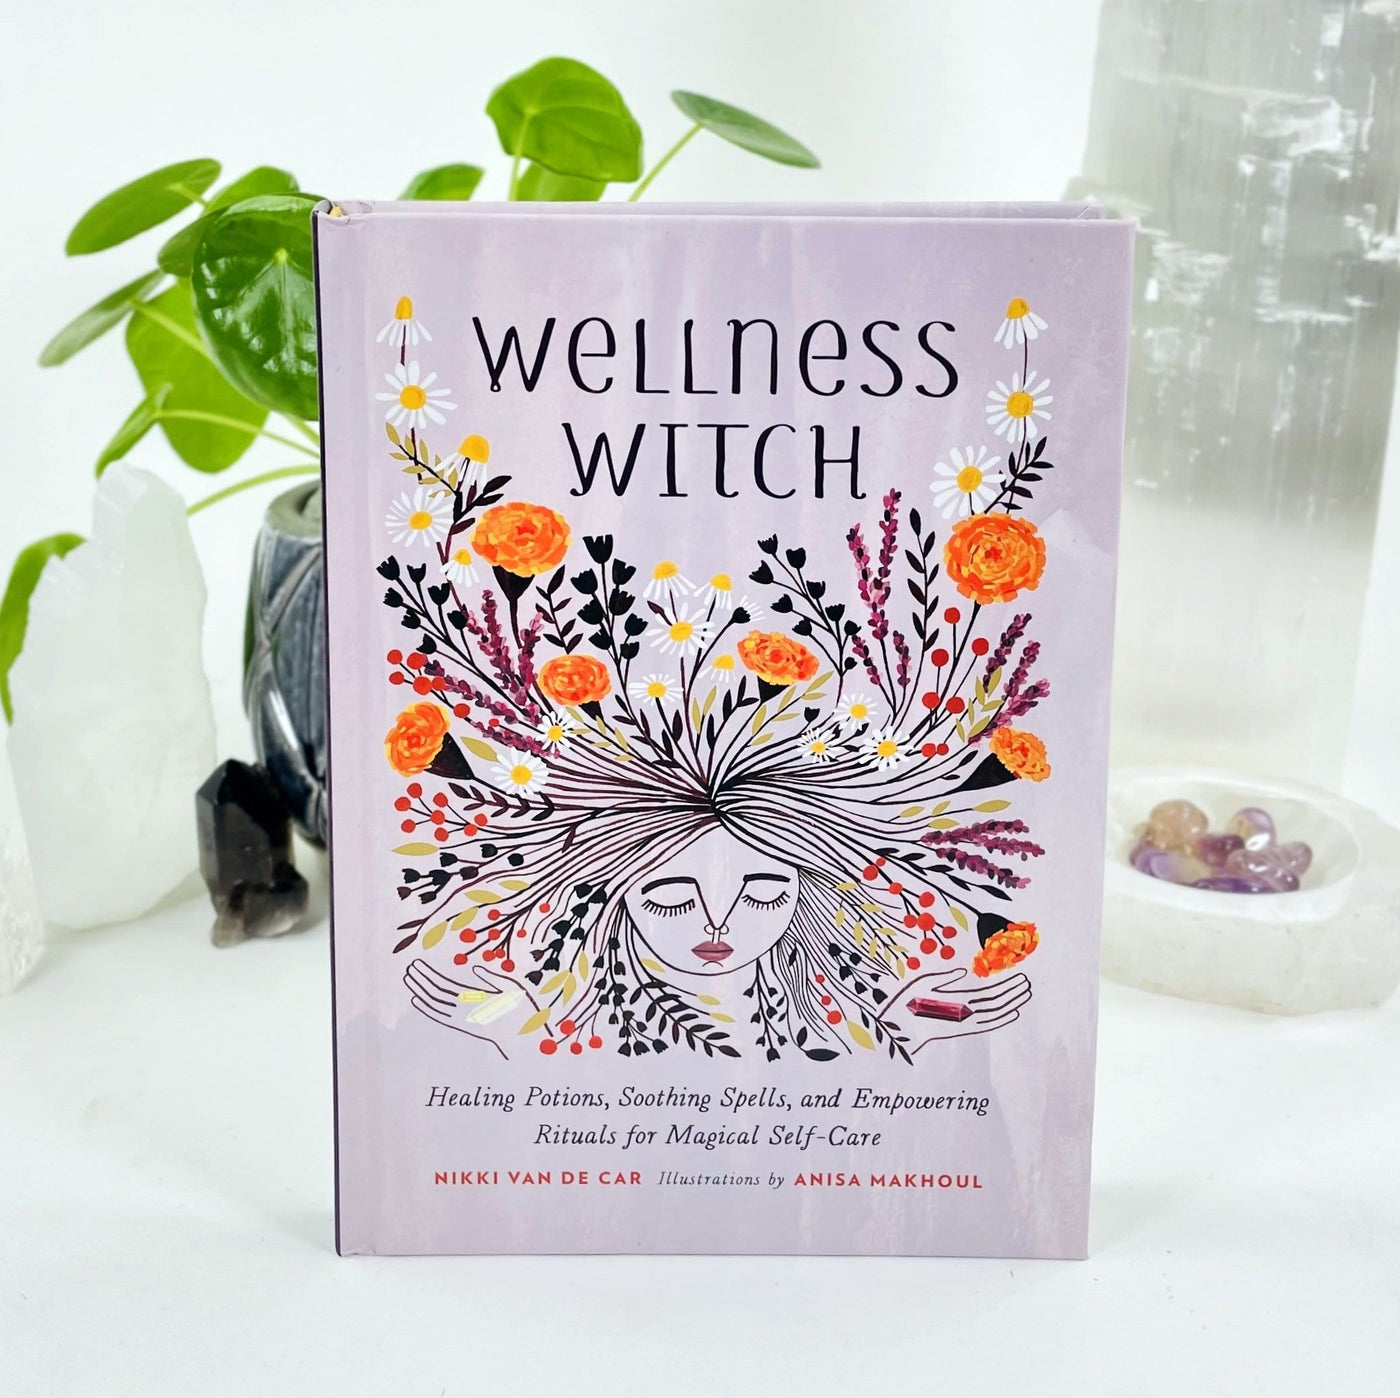 Front cover of the book Wellness Witch.  It is light purple with a woman's face surrounded by flowers.